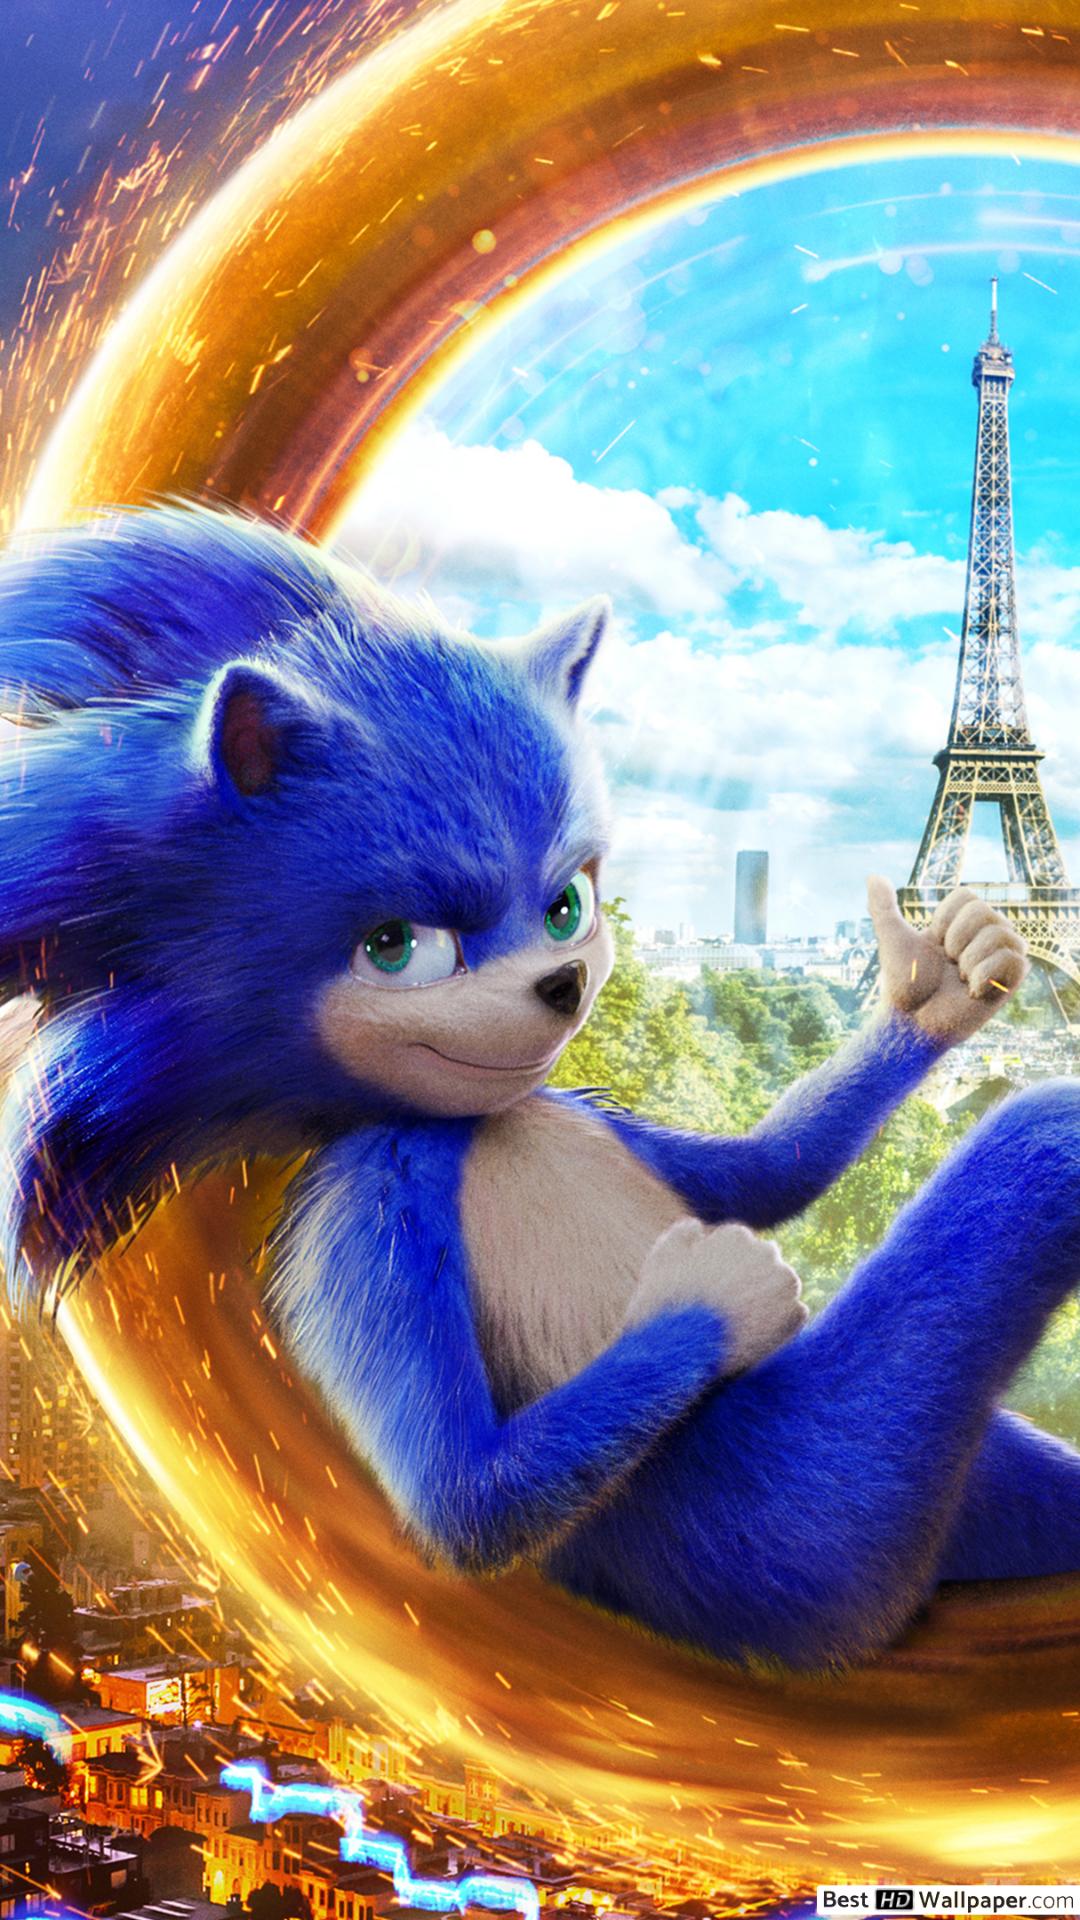 Sonic the Hedgehog 2019 HD wallpapers download